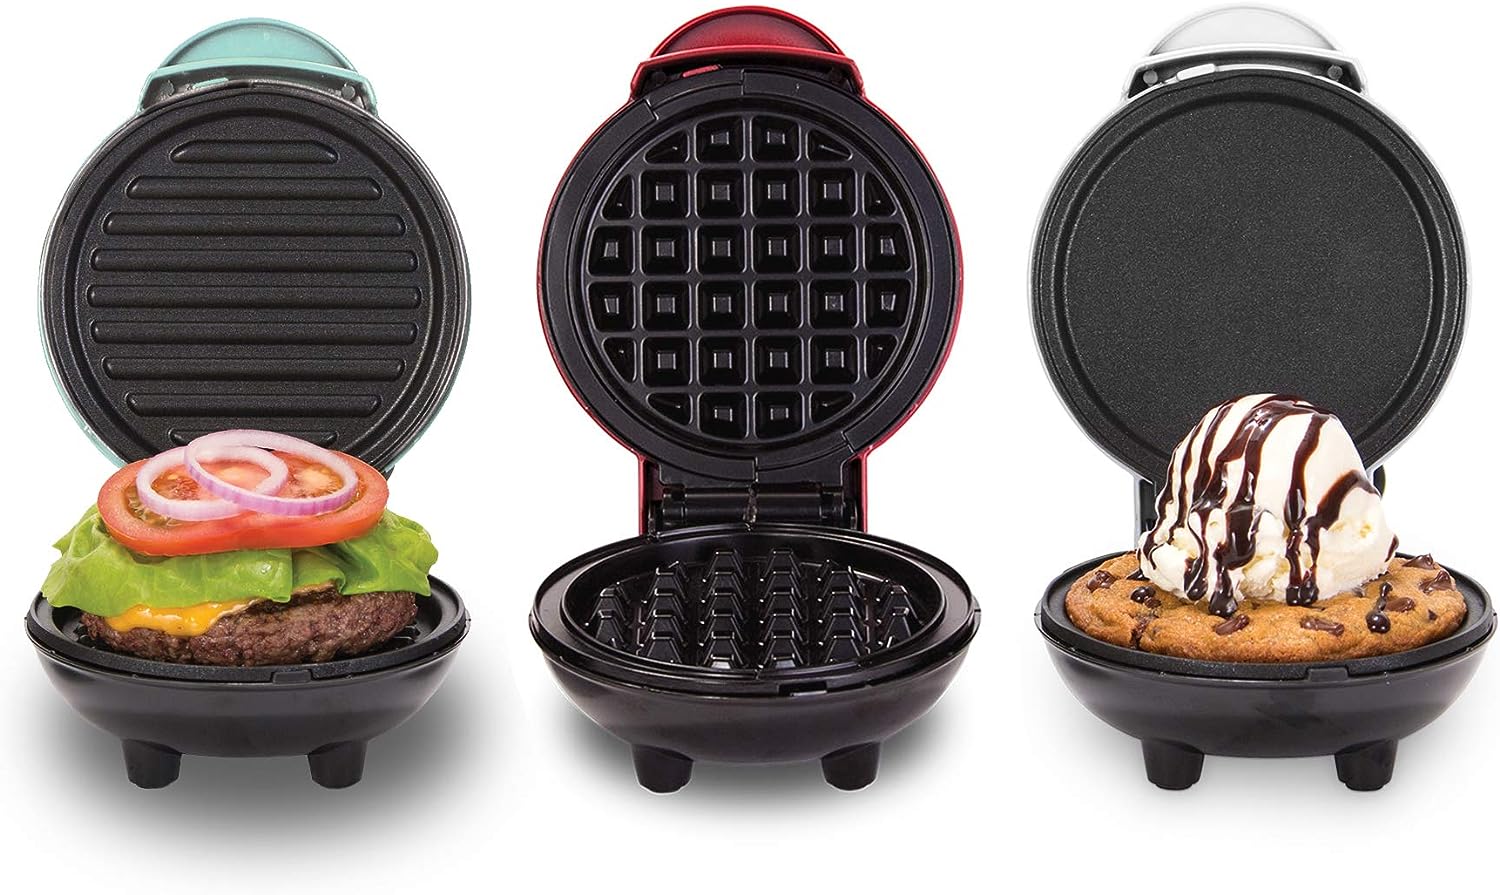  DASH Multi Mini Waffle Maker: Four Mini Waffles, Perfect for  Families and Individuals, 4 Inch Dual Non-stick Surfaces with Quick Release  & Easy Clean - Graphite